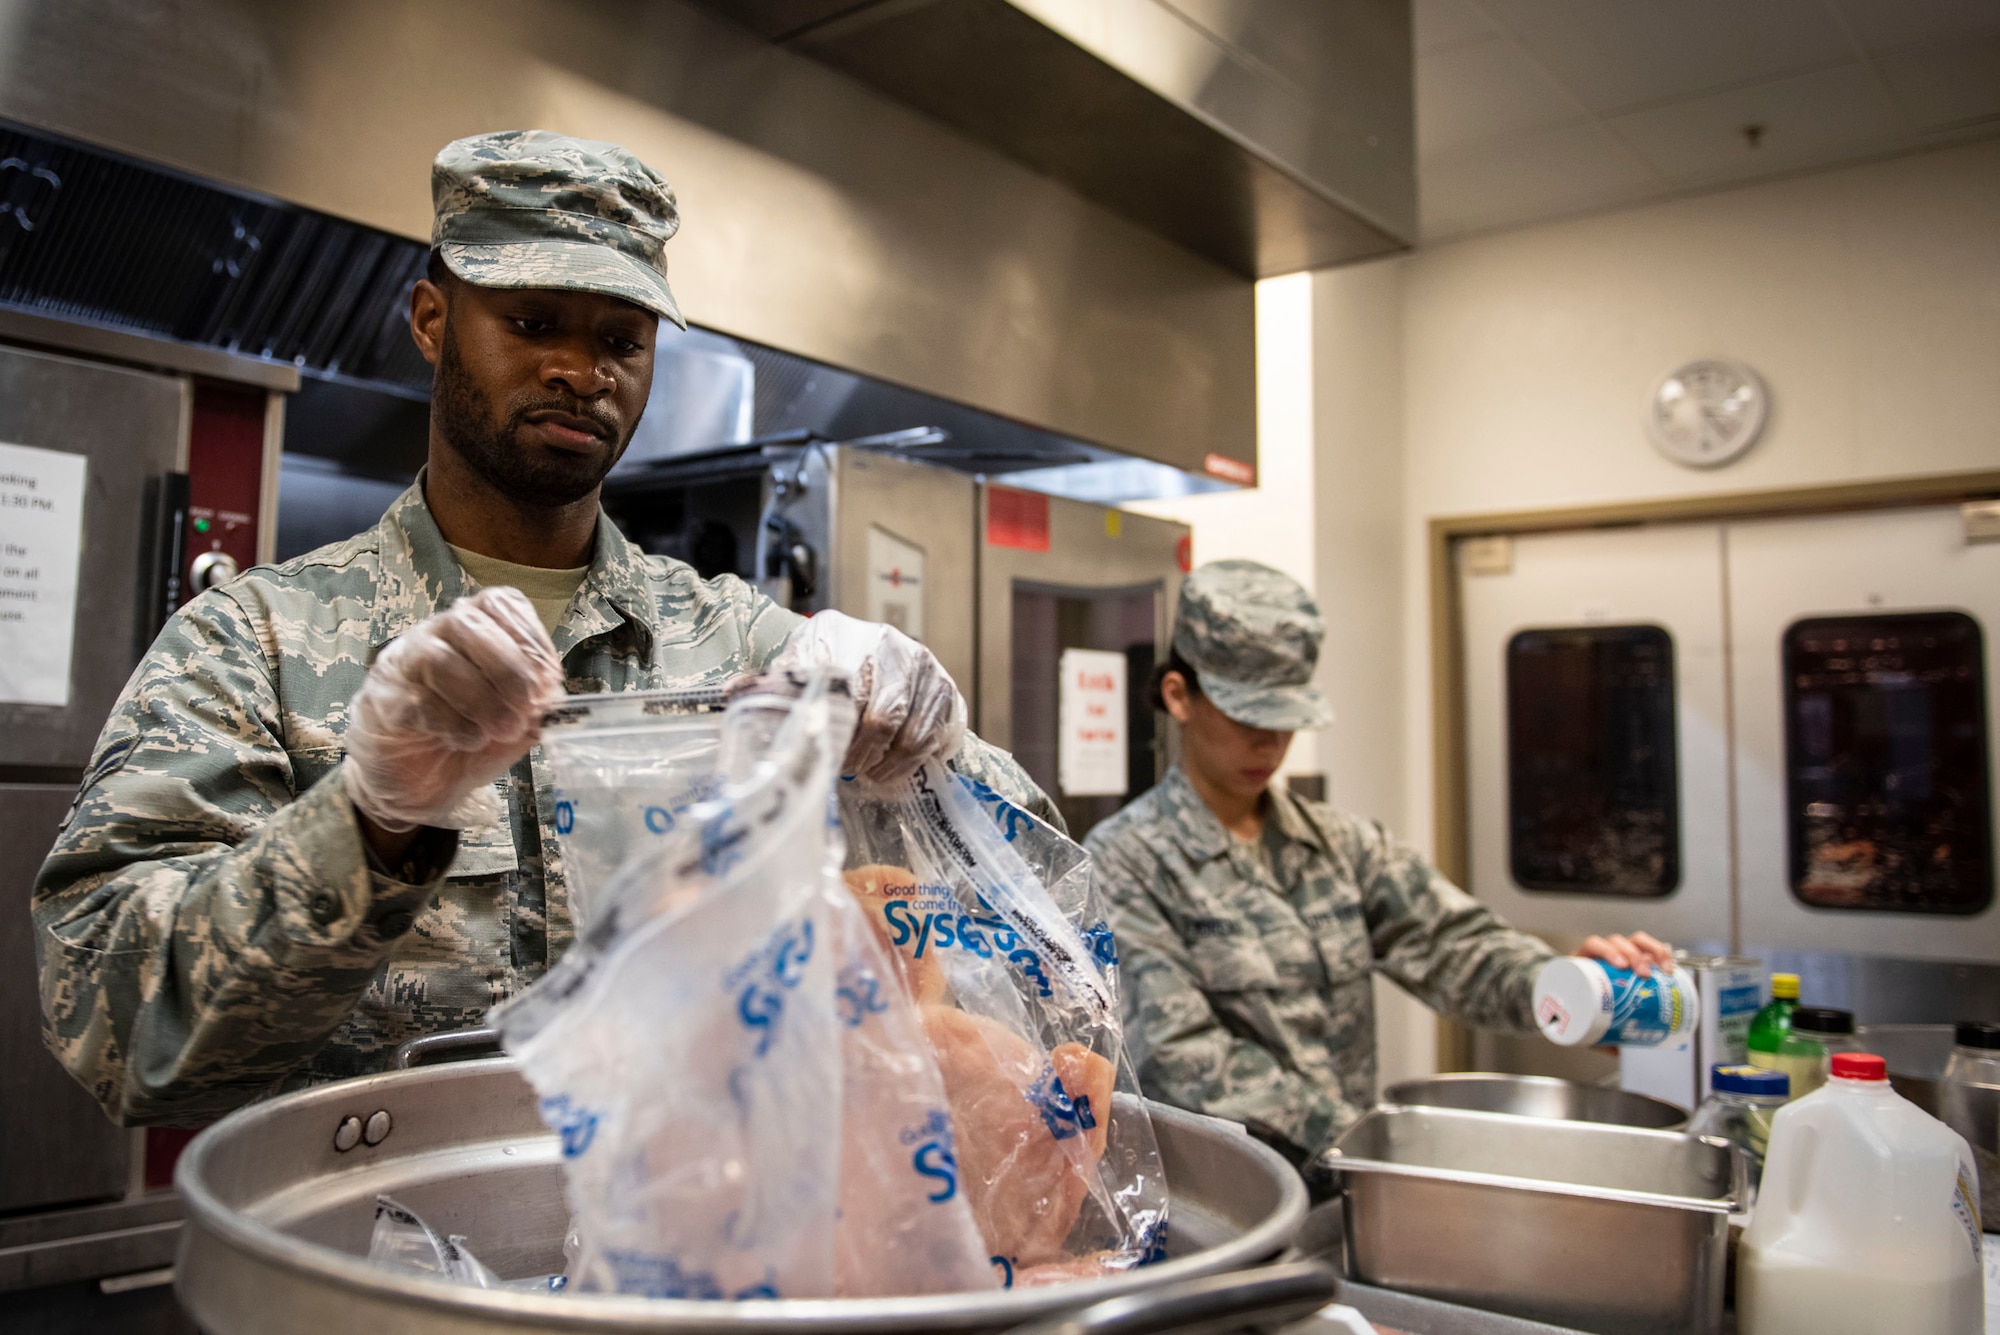 The 96th FSS’s dining facility will represent Air Force Materiel Command at the Air Force John L. Hennessy Award competition this year.